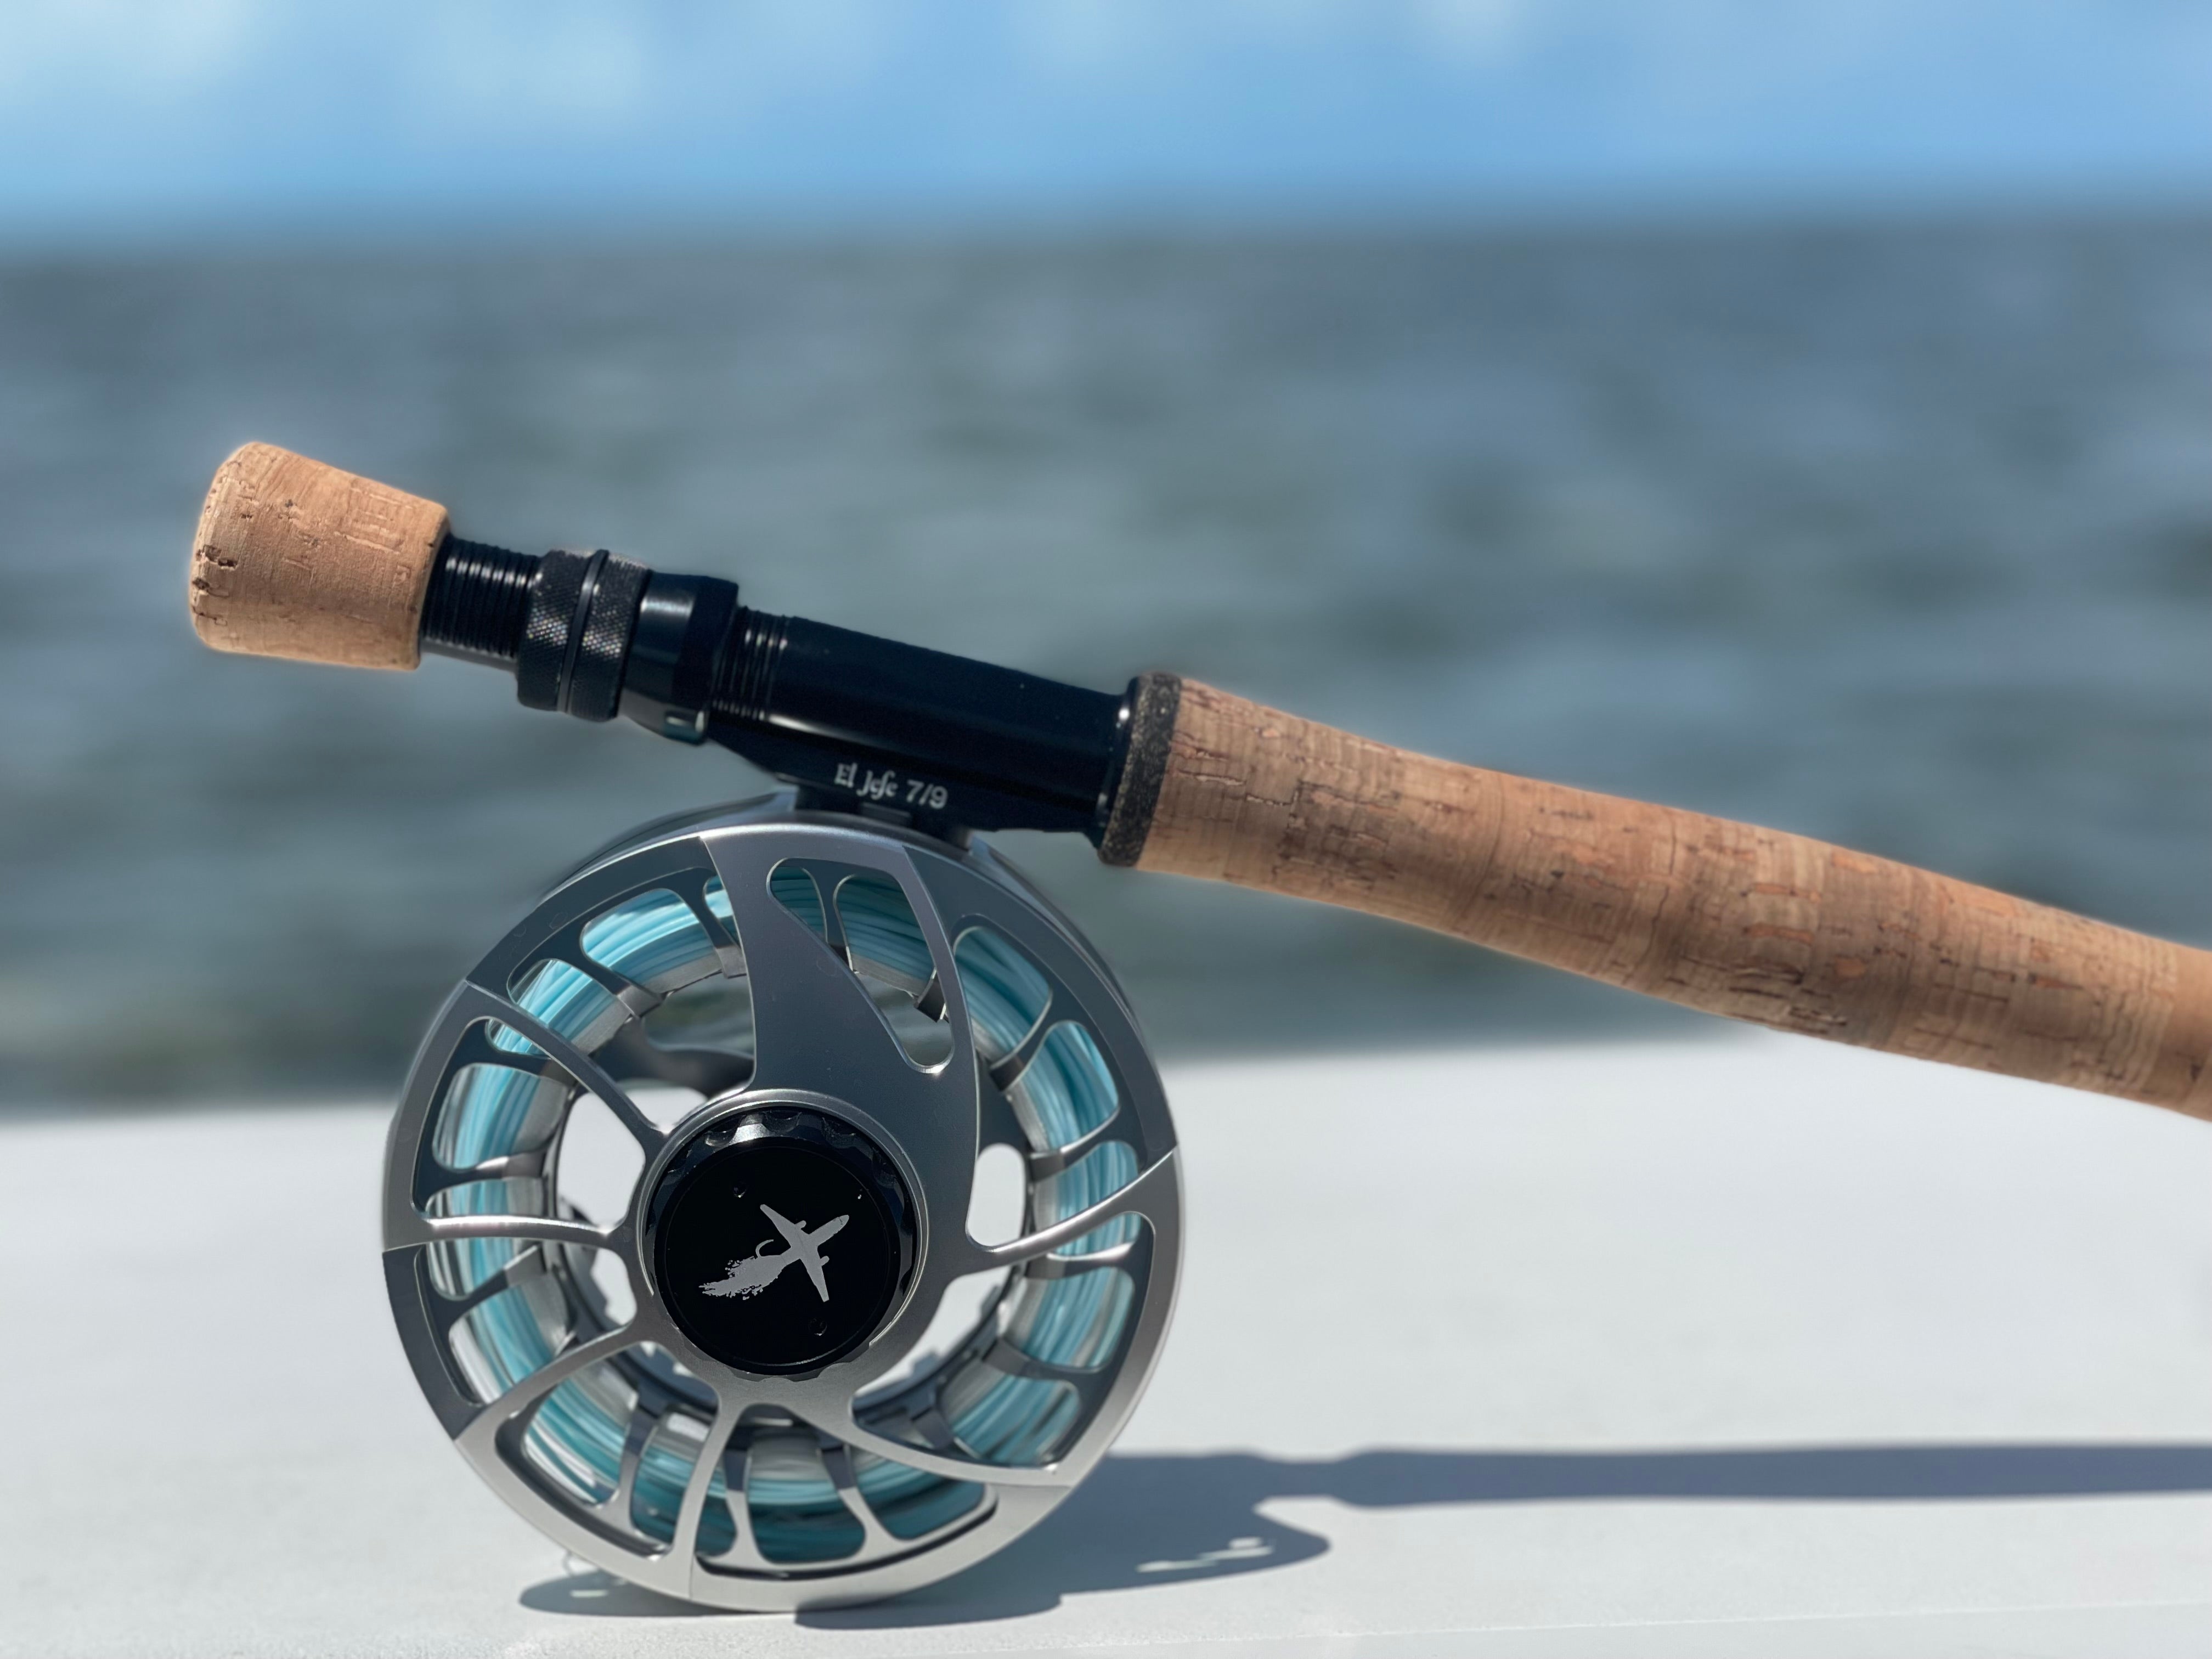 El Jefe Saltwater Fly Fishing Combo Package | 906-10 | 9' Six Section 10 Weight Fly Rod And Reel Outfit